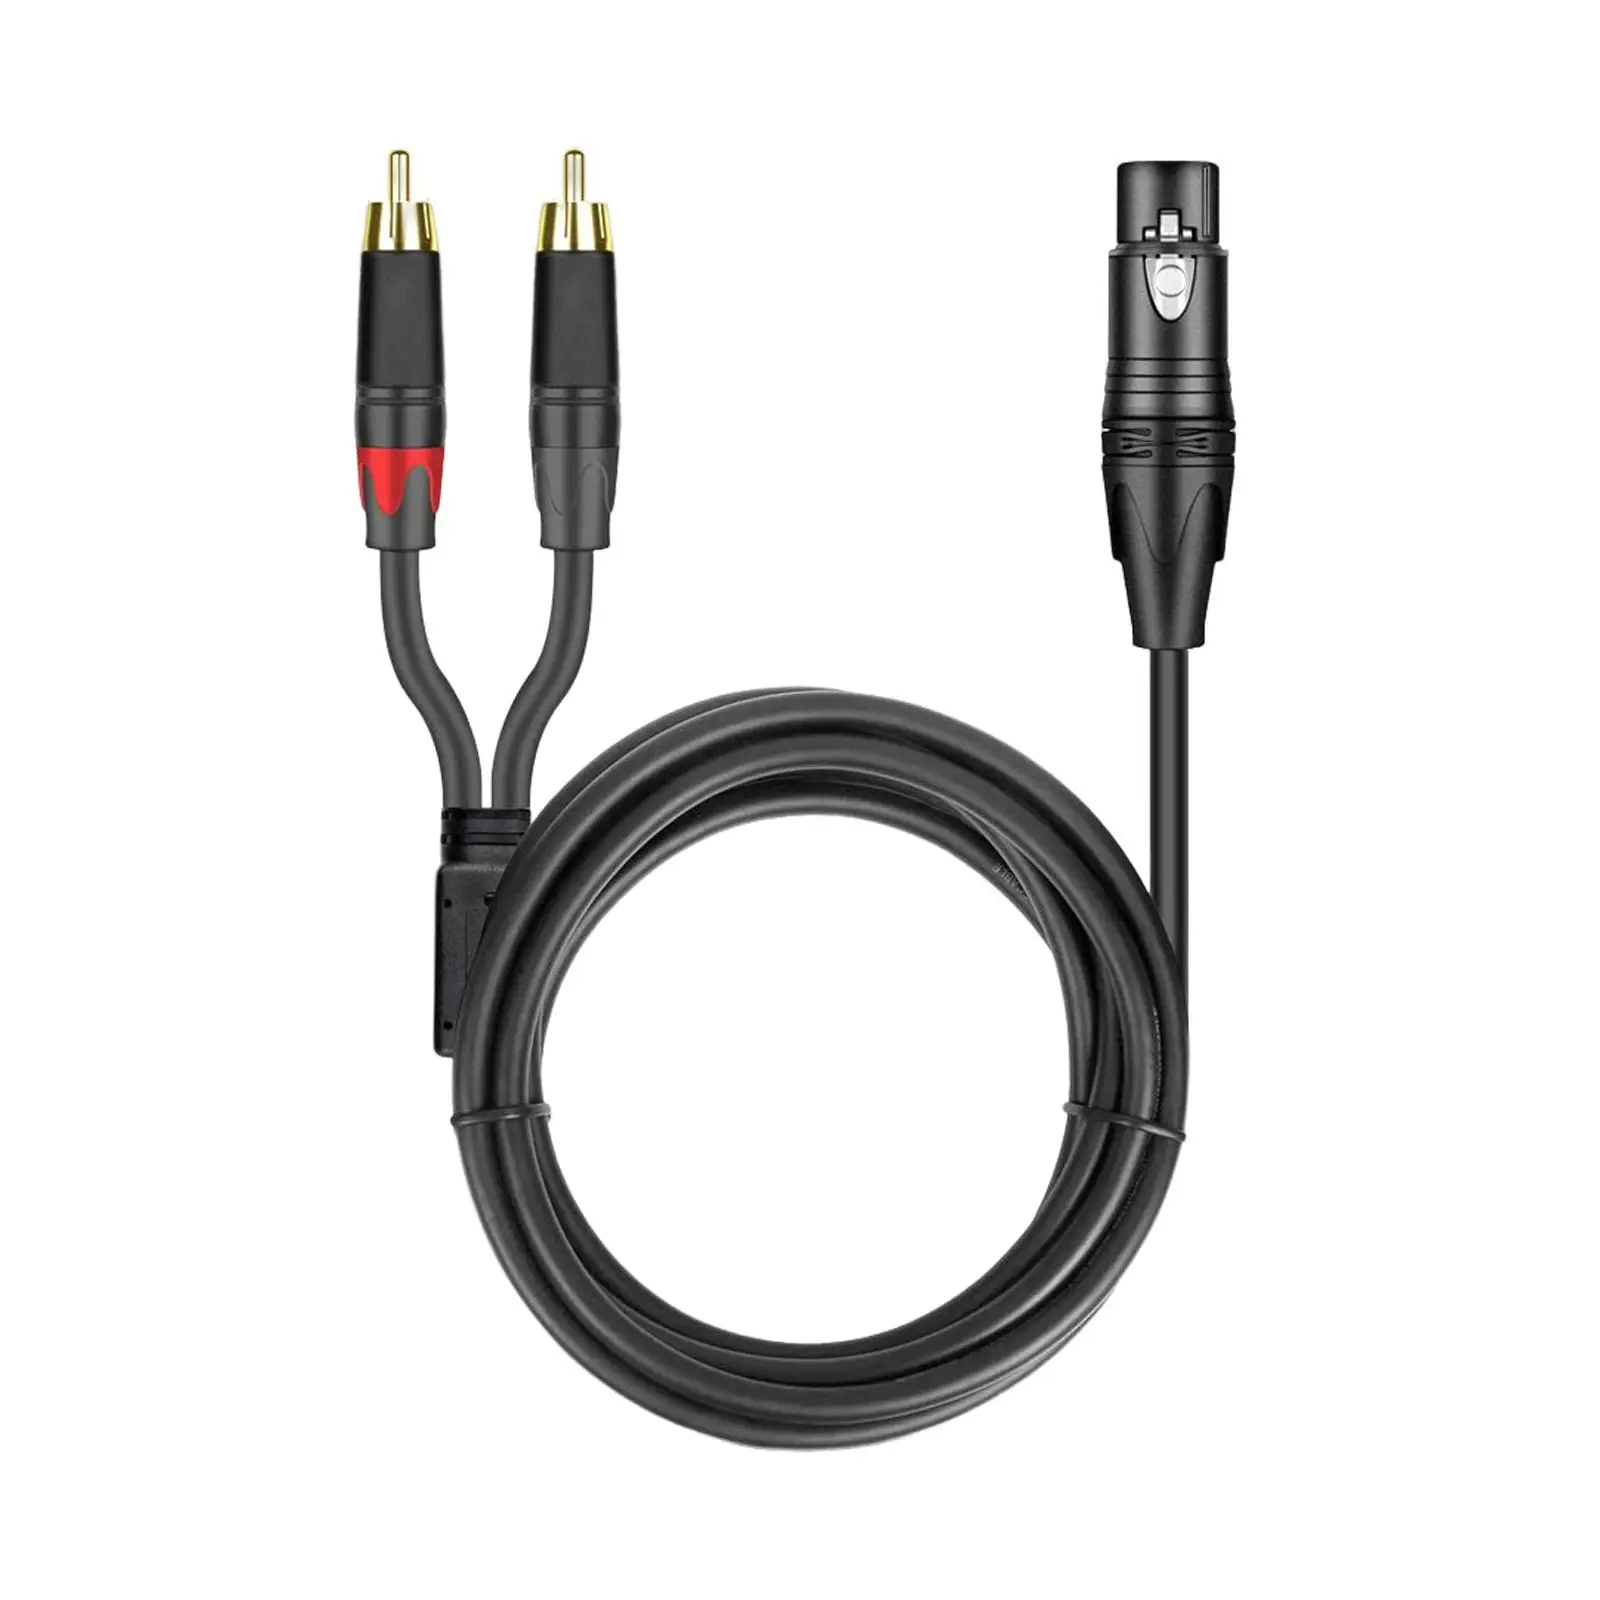 XLR to Dual Cable 2 Y Splitter Patch Cable Plug Adapter Heavy Duty Unbalanced Phono Recorders Audio Equipment